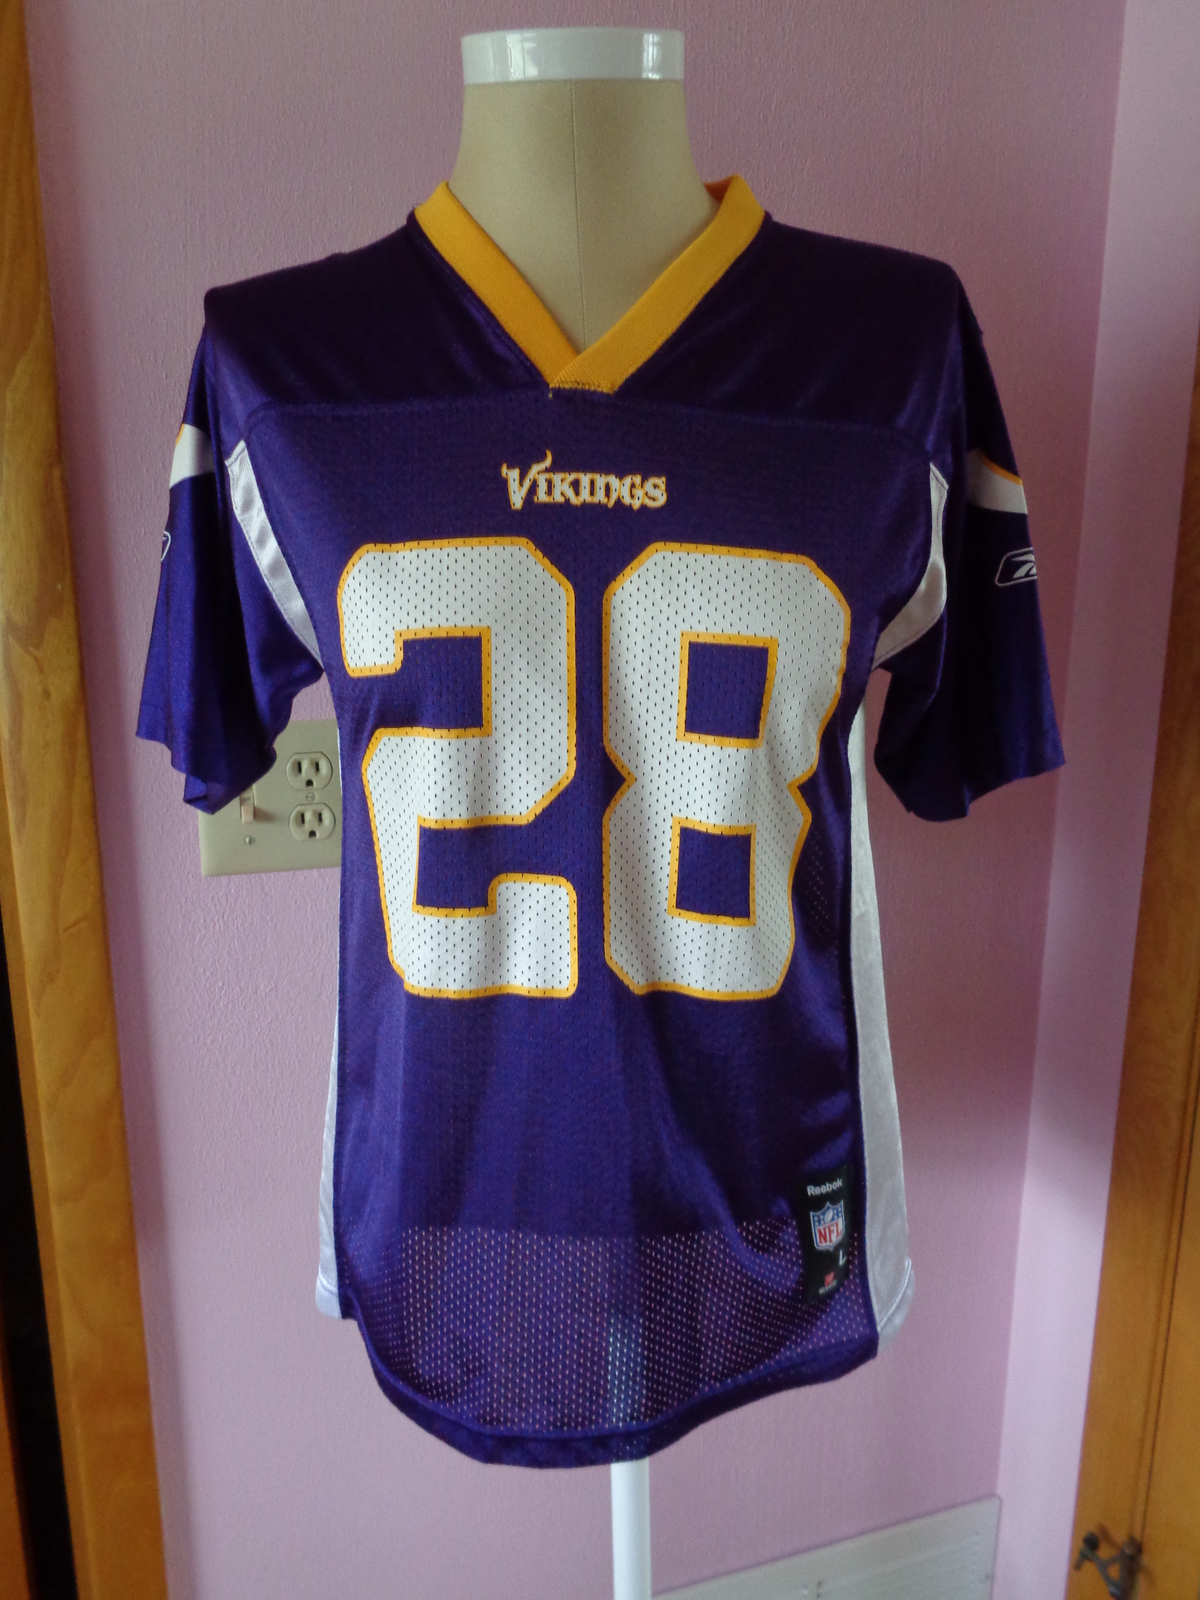 Primary image for Minnesota Vikings Adrian Peterson #28 NFL Reebok Football Jersey Youth L 14-16  